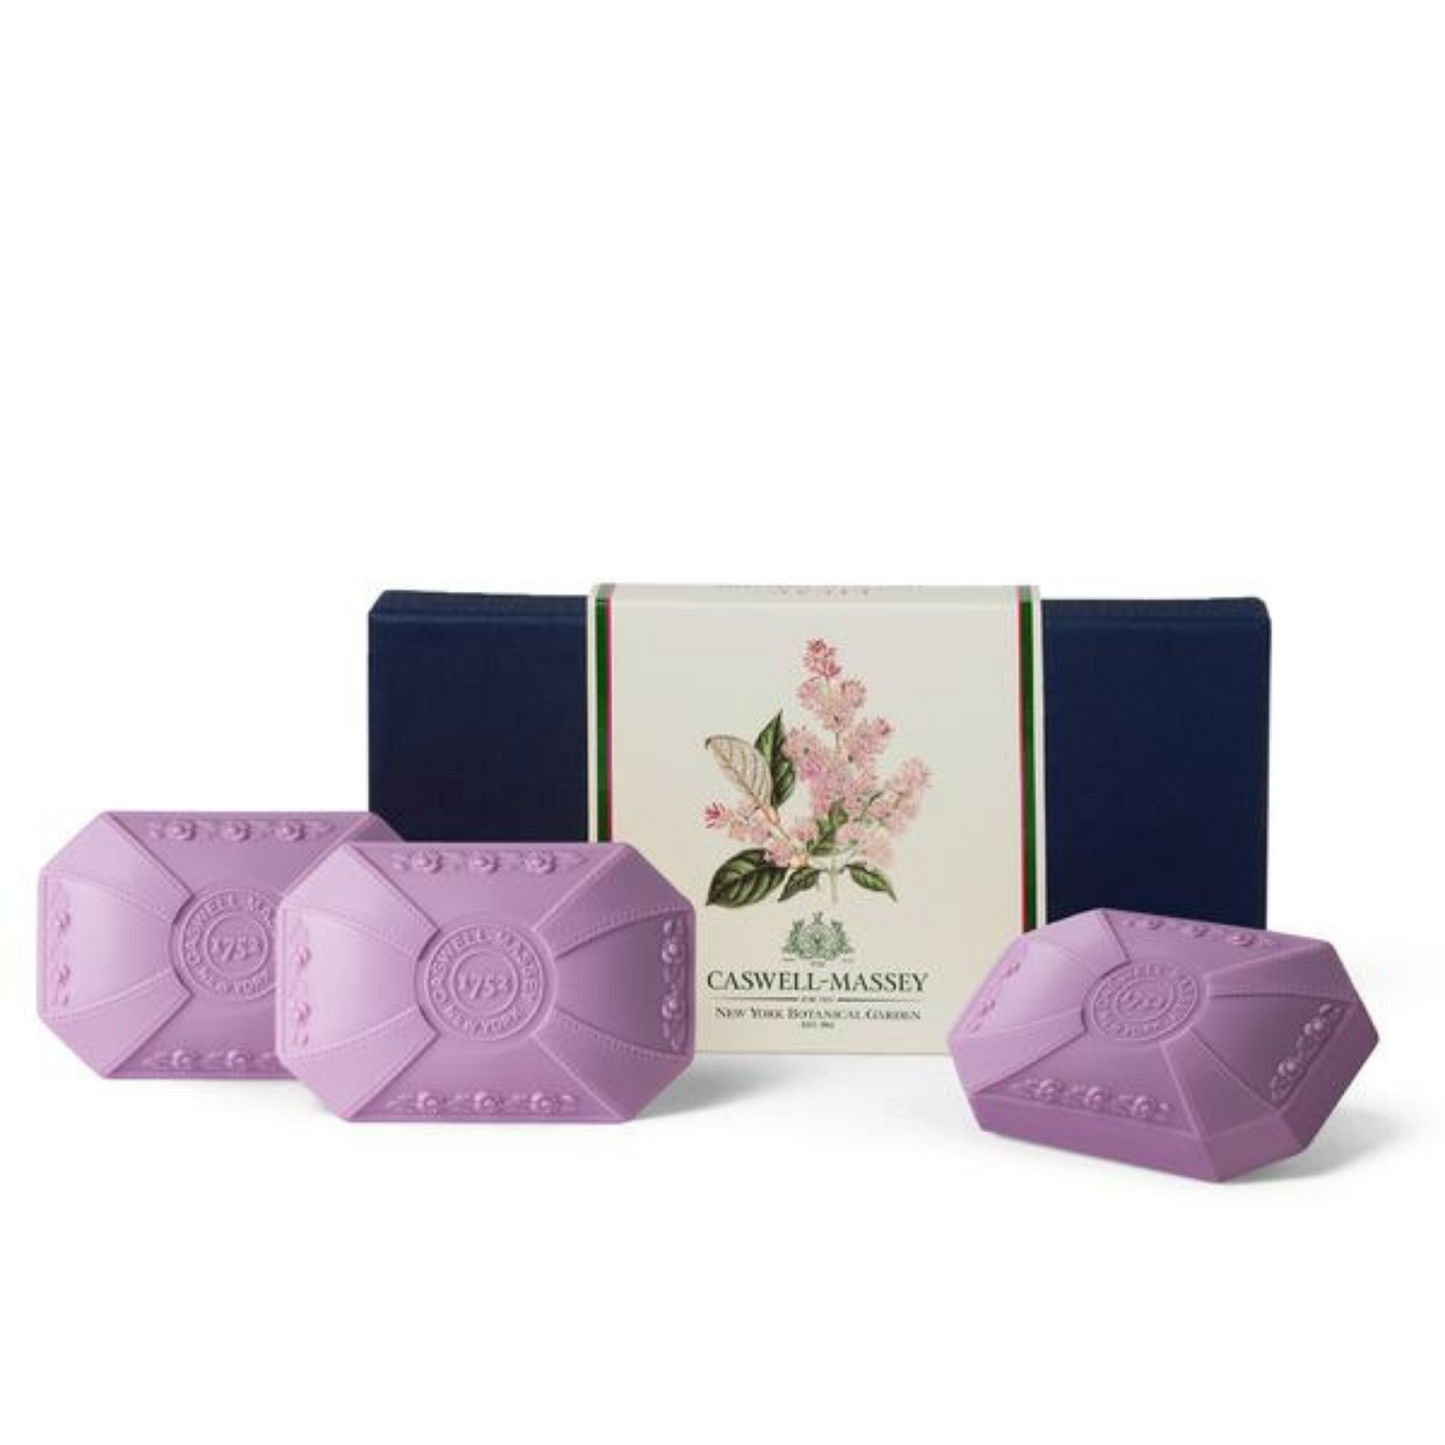 Primary image of NYBG Lilac Three Bar Soap Set